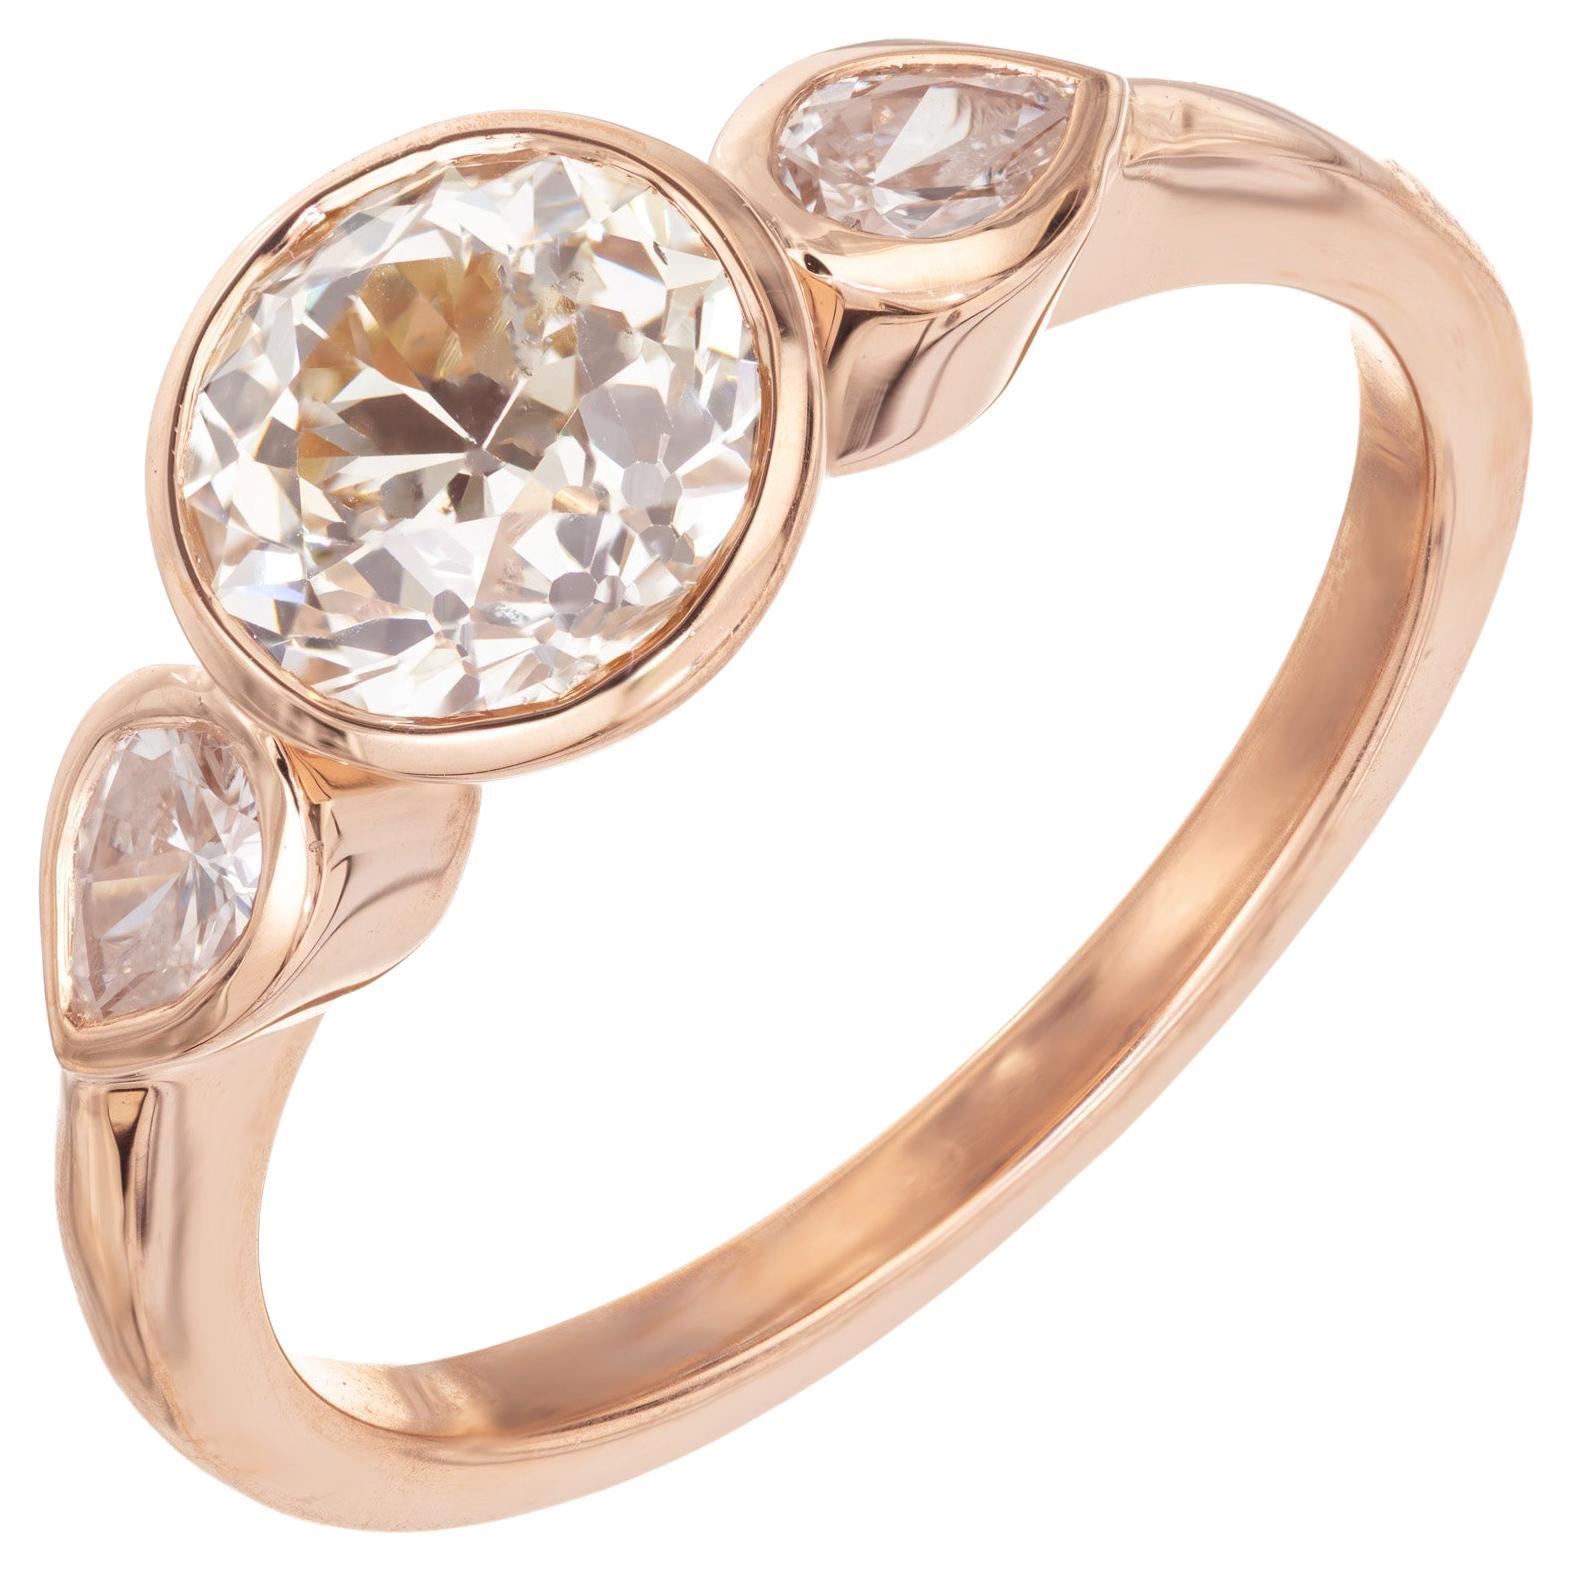 Peter Suchy GIA Certified 1.42 Carat Round Diamond Rose Gold Engagement Ring  For Sale